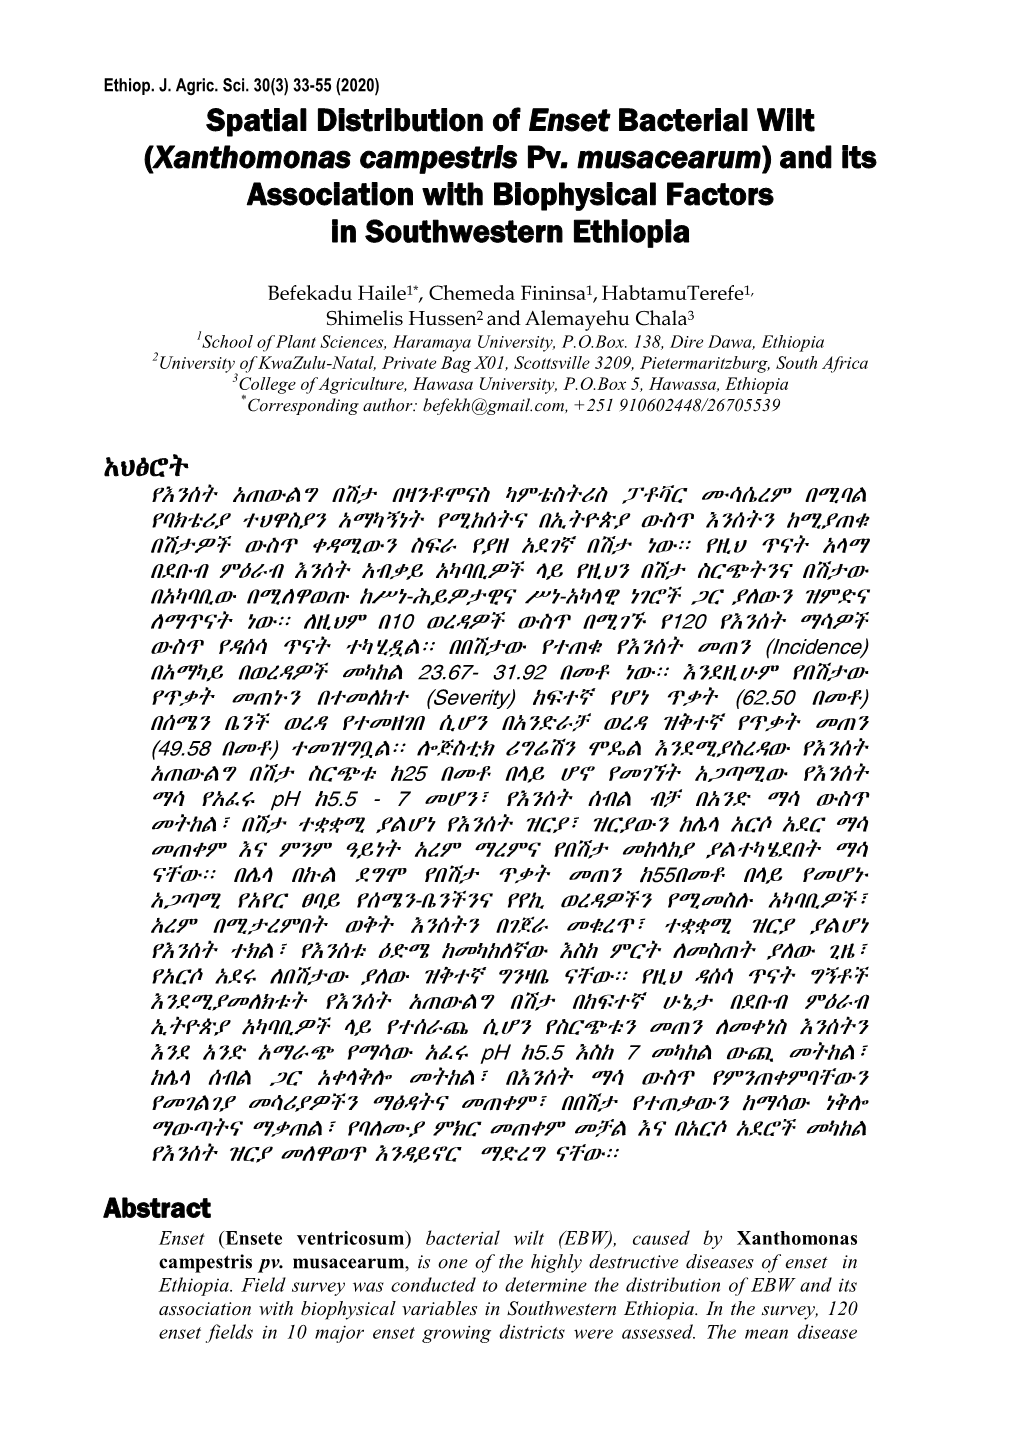 Xanthomonas Campestris Pv. Musacearum) and Its Association with Biophysical Factors in Southwestern Ethiopia